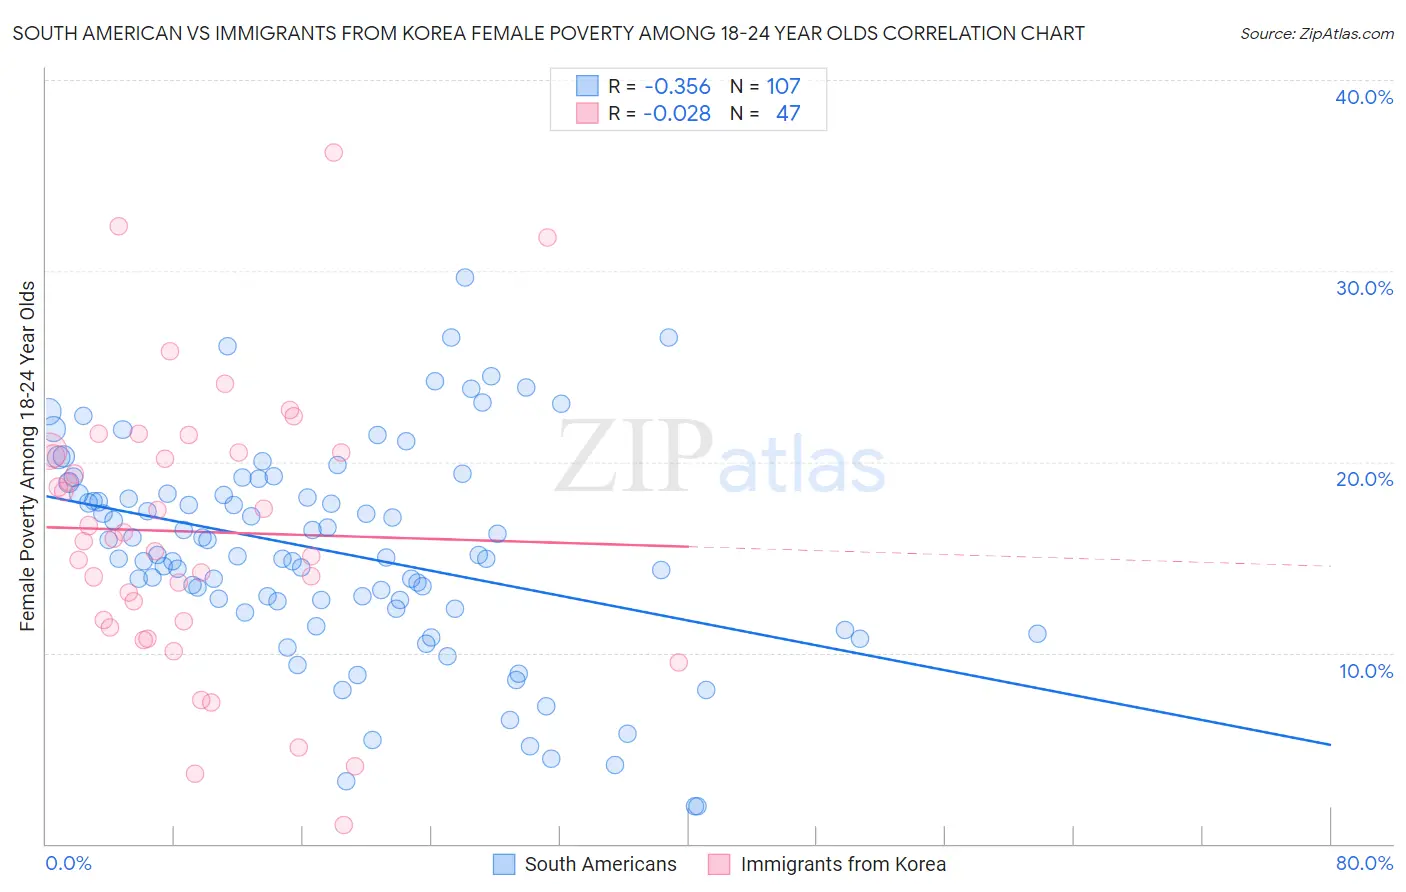 South American vs Immigrants from Korea Female Poverty Among 18-24 Year Olds